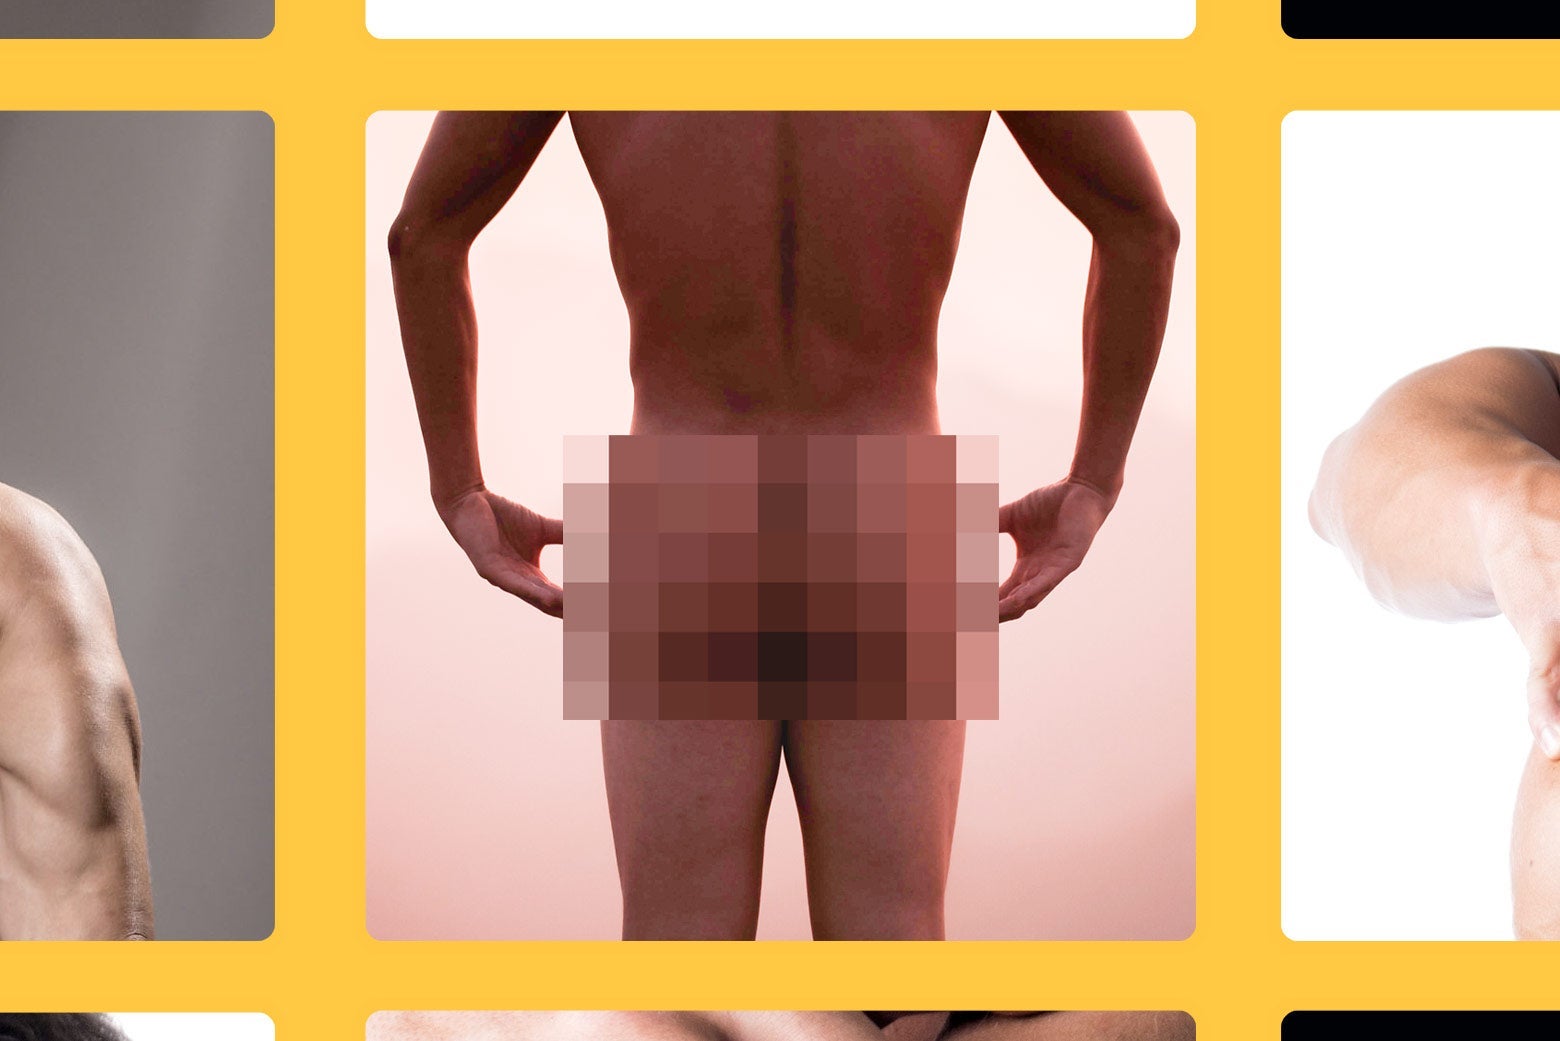 Grindr Whats behind the new rule thats surprising users? pic